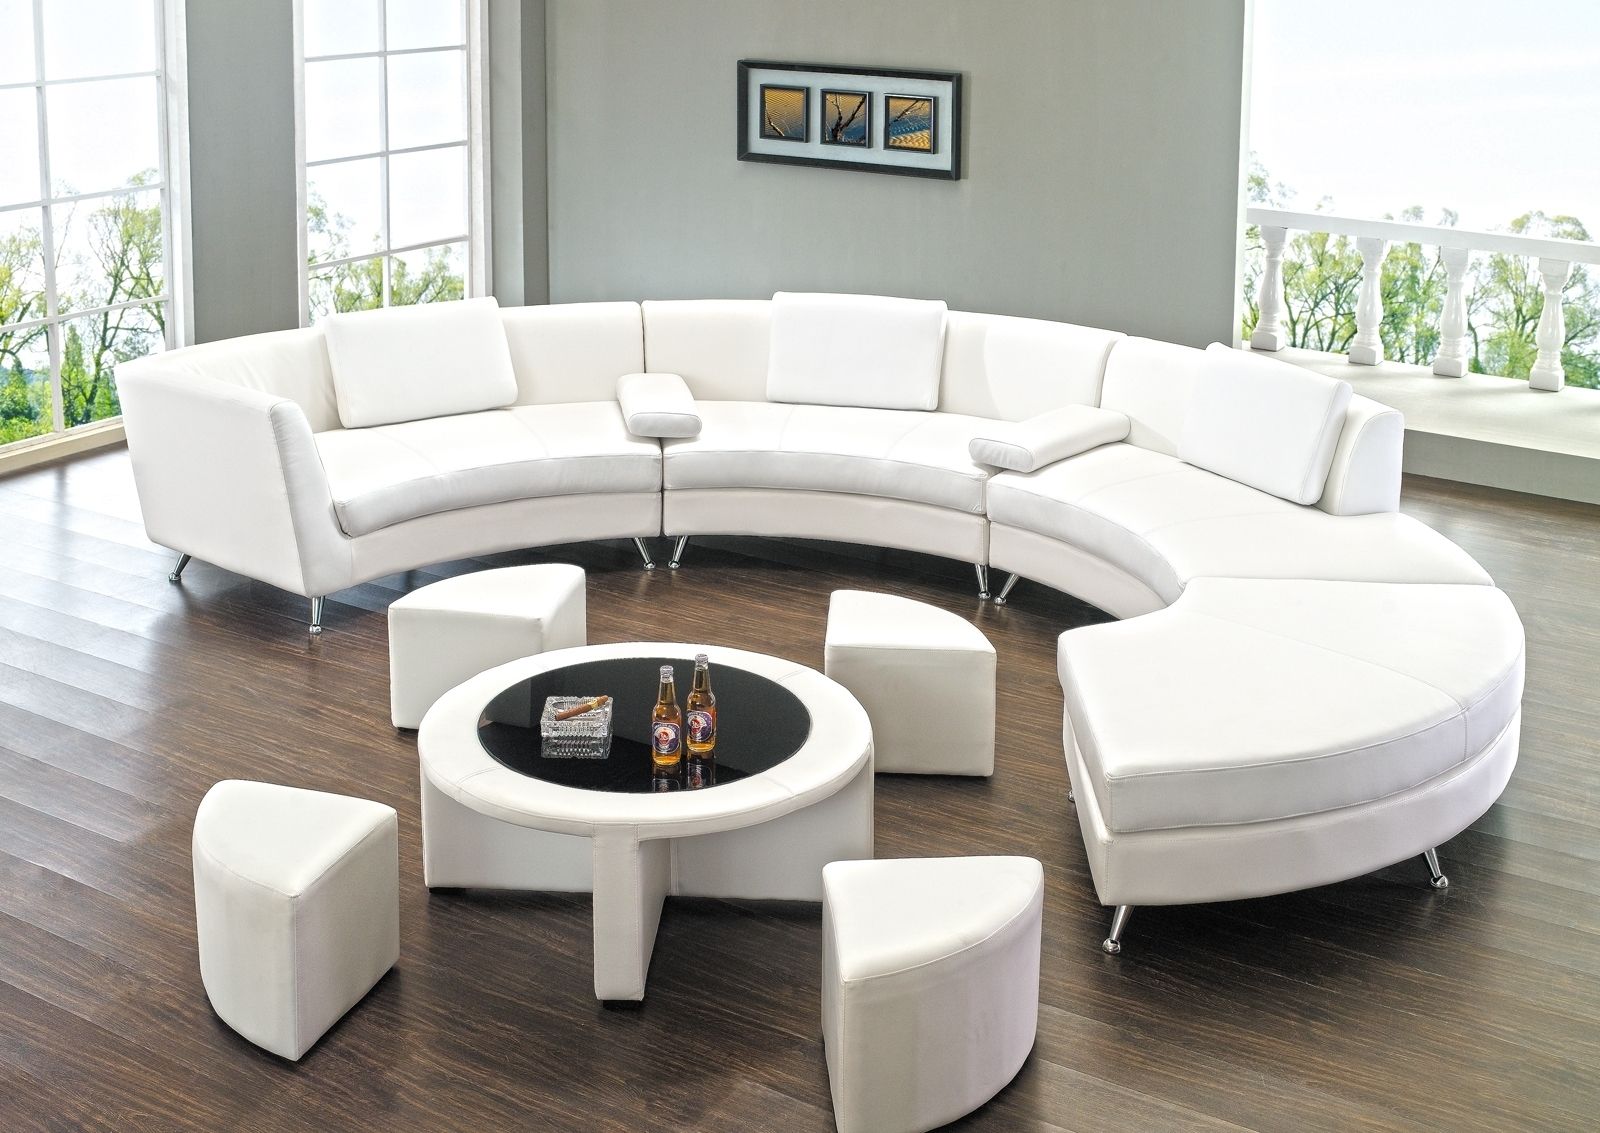 Round Sectional Sofa Has One Of The Best Kind Of Other Is Sectionals Regarding Round Sectional Sofas (View 2 of 10)